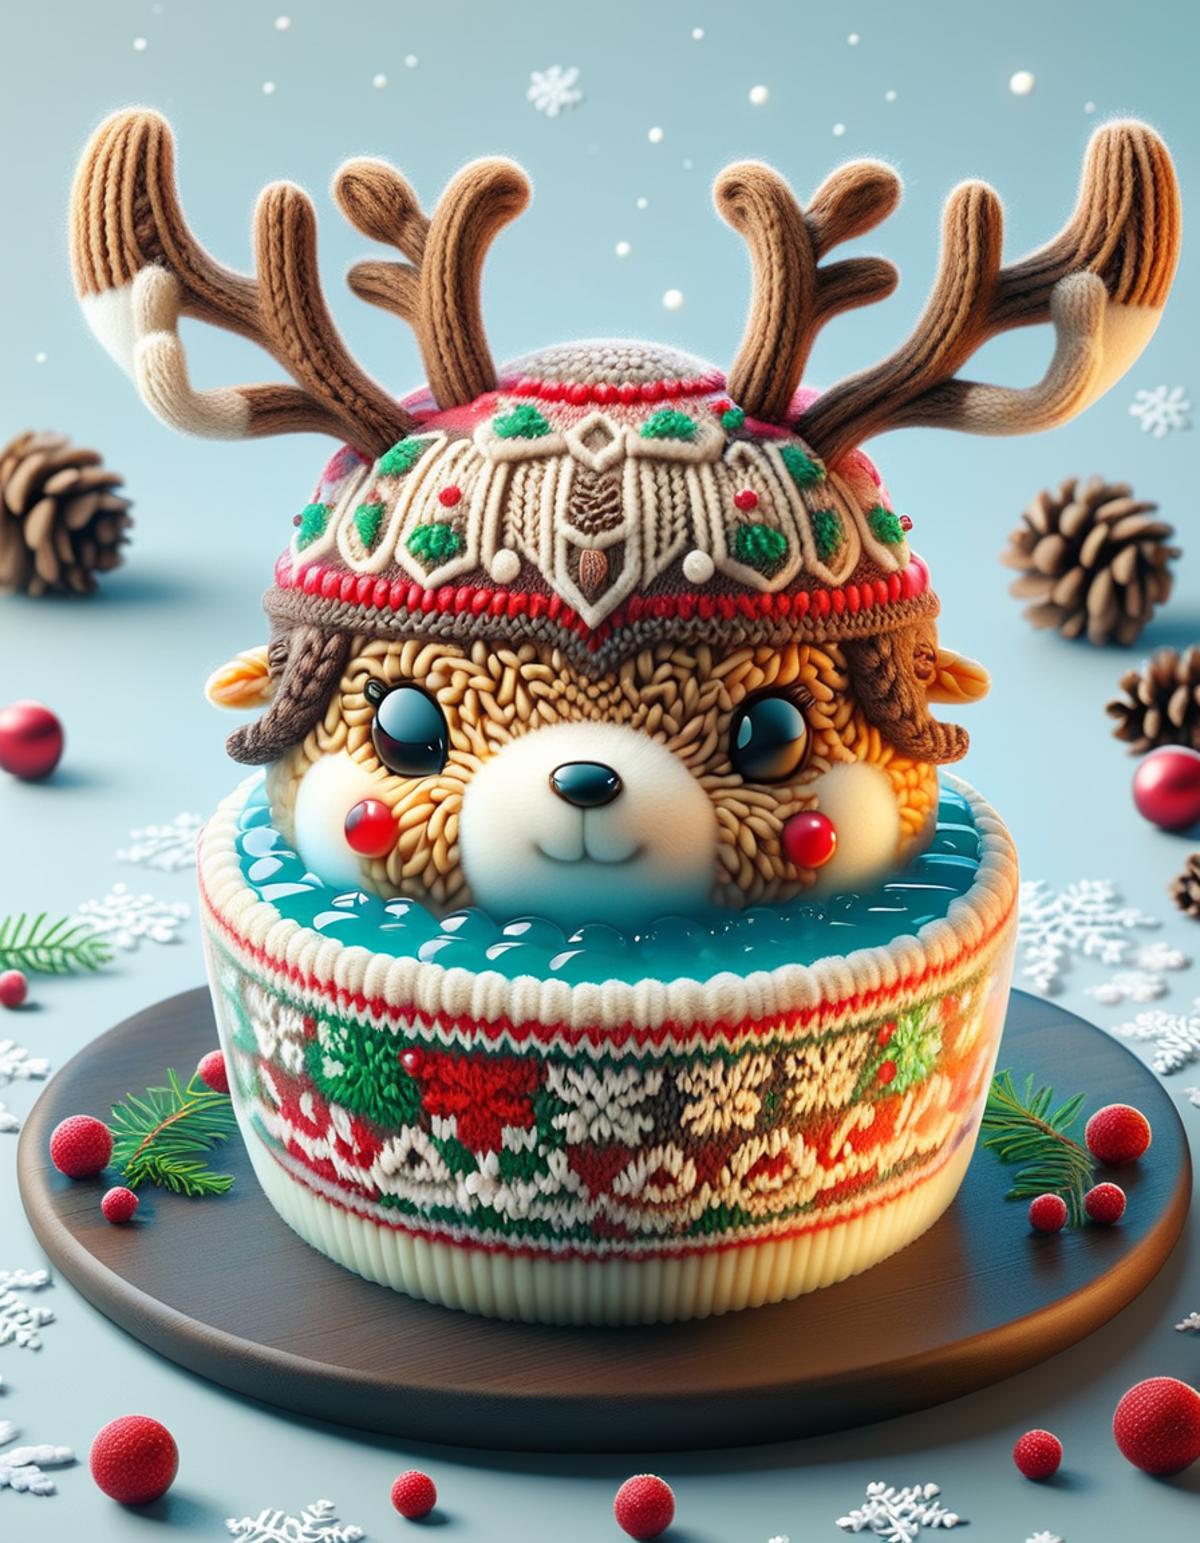 A cute and festive Christmas cake with a deer head on top.